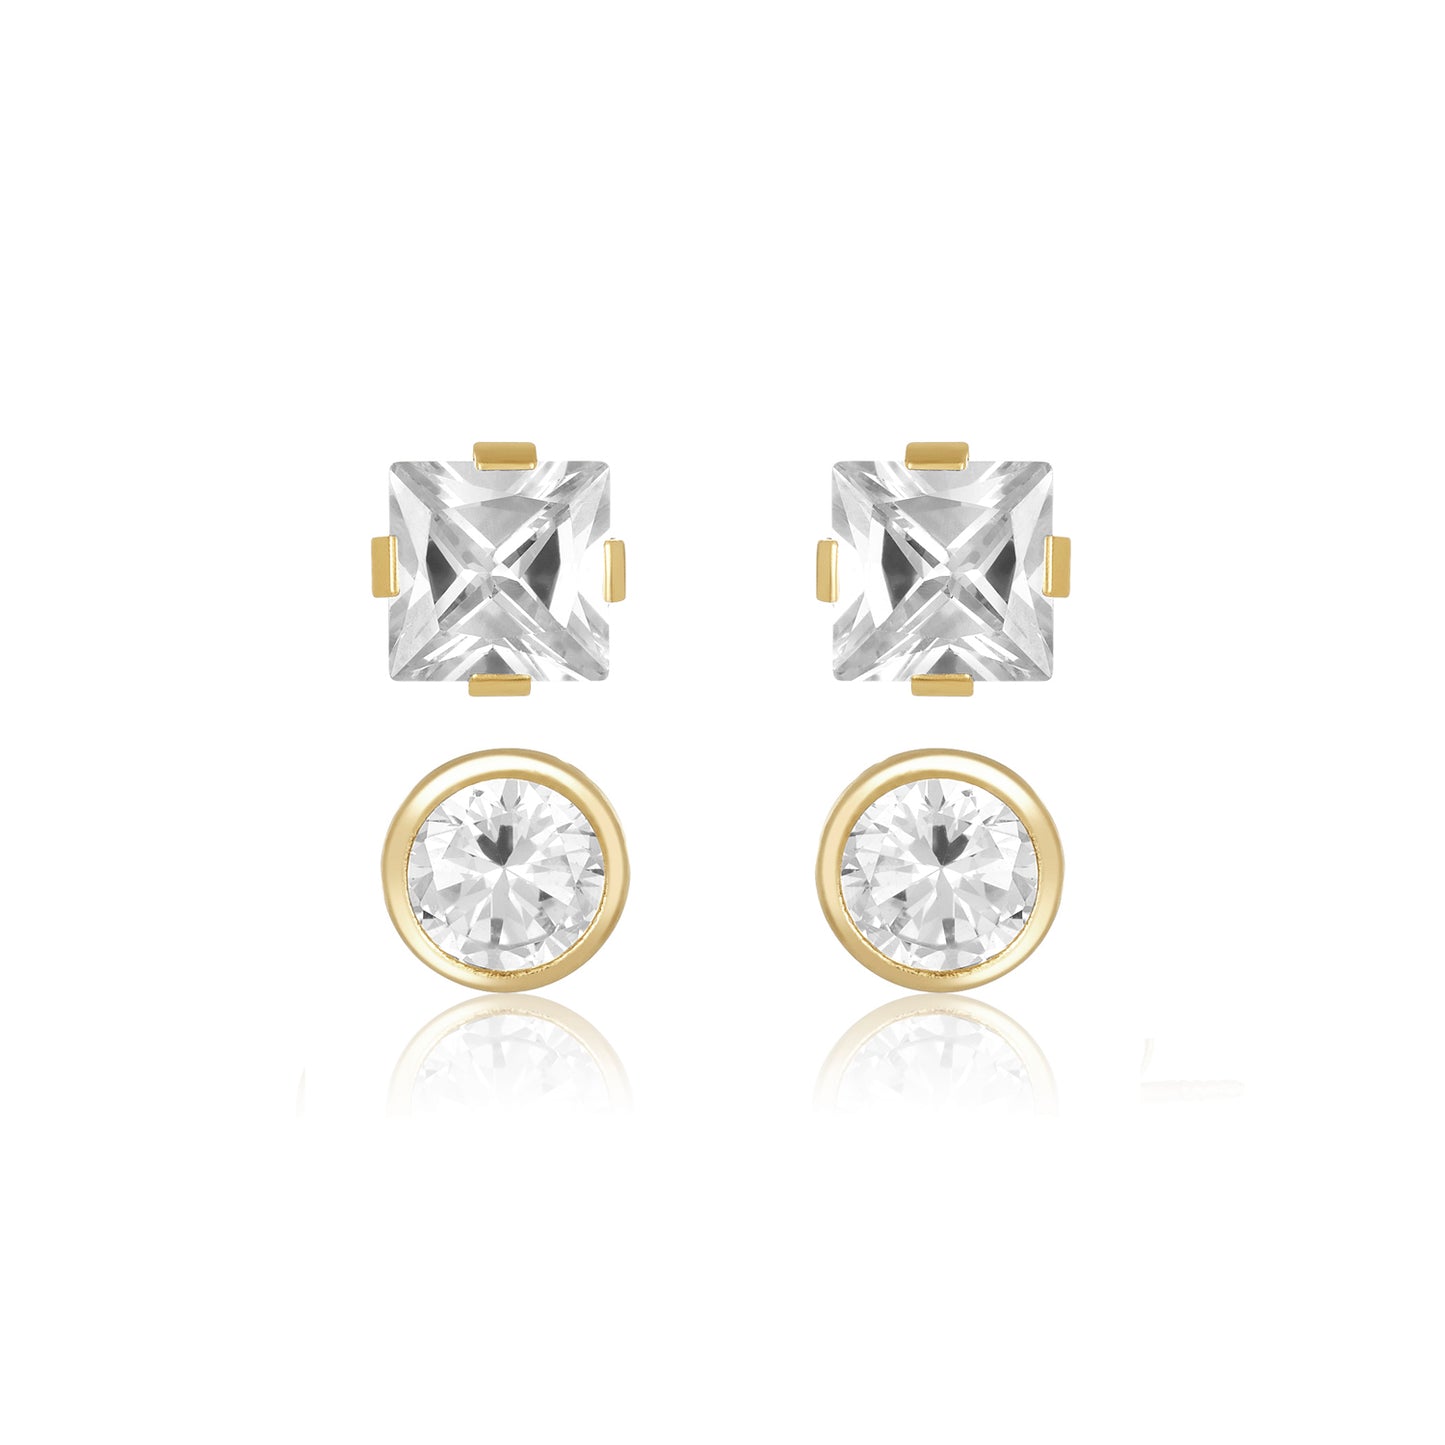 Twin Studs ~ Square & Round Stud Earrings